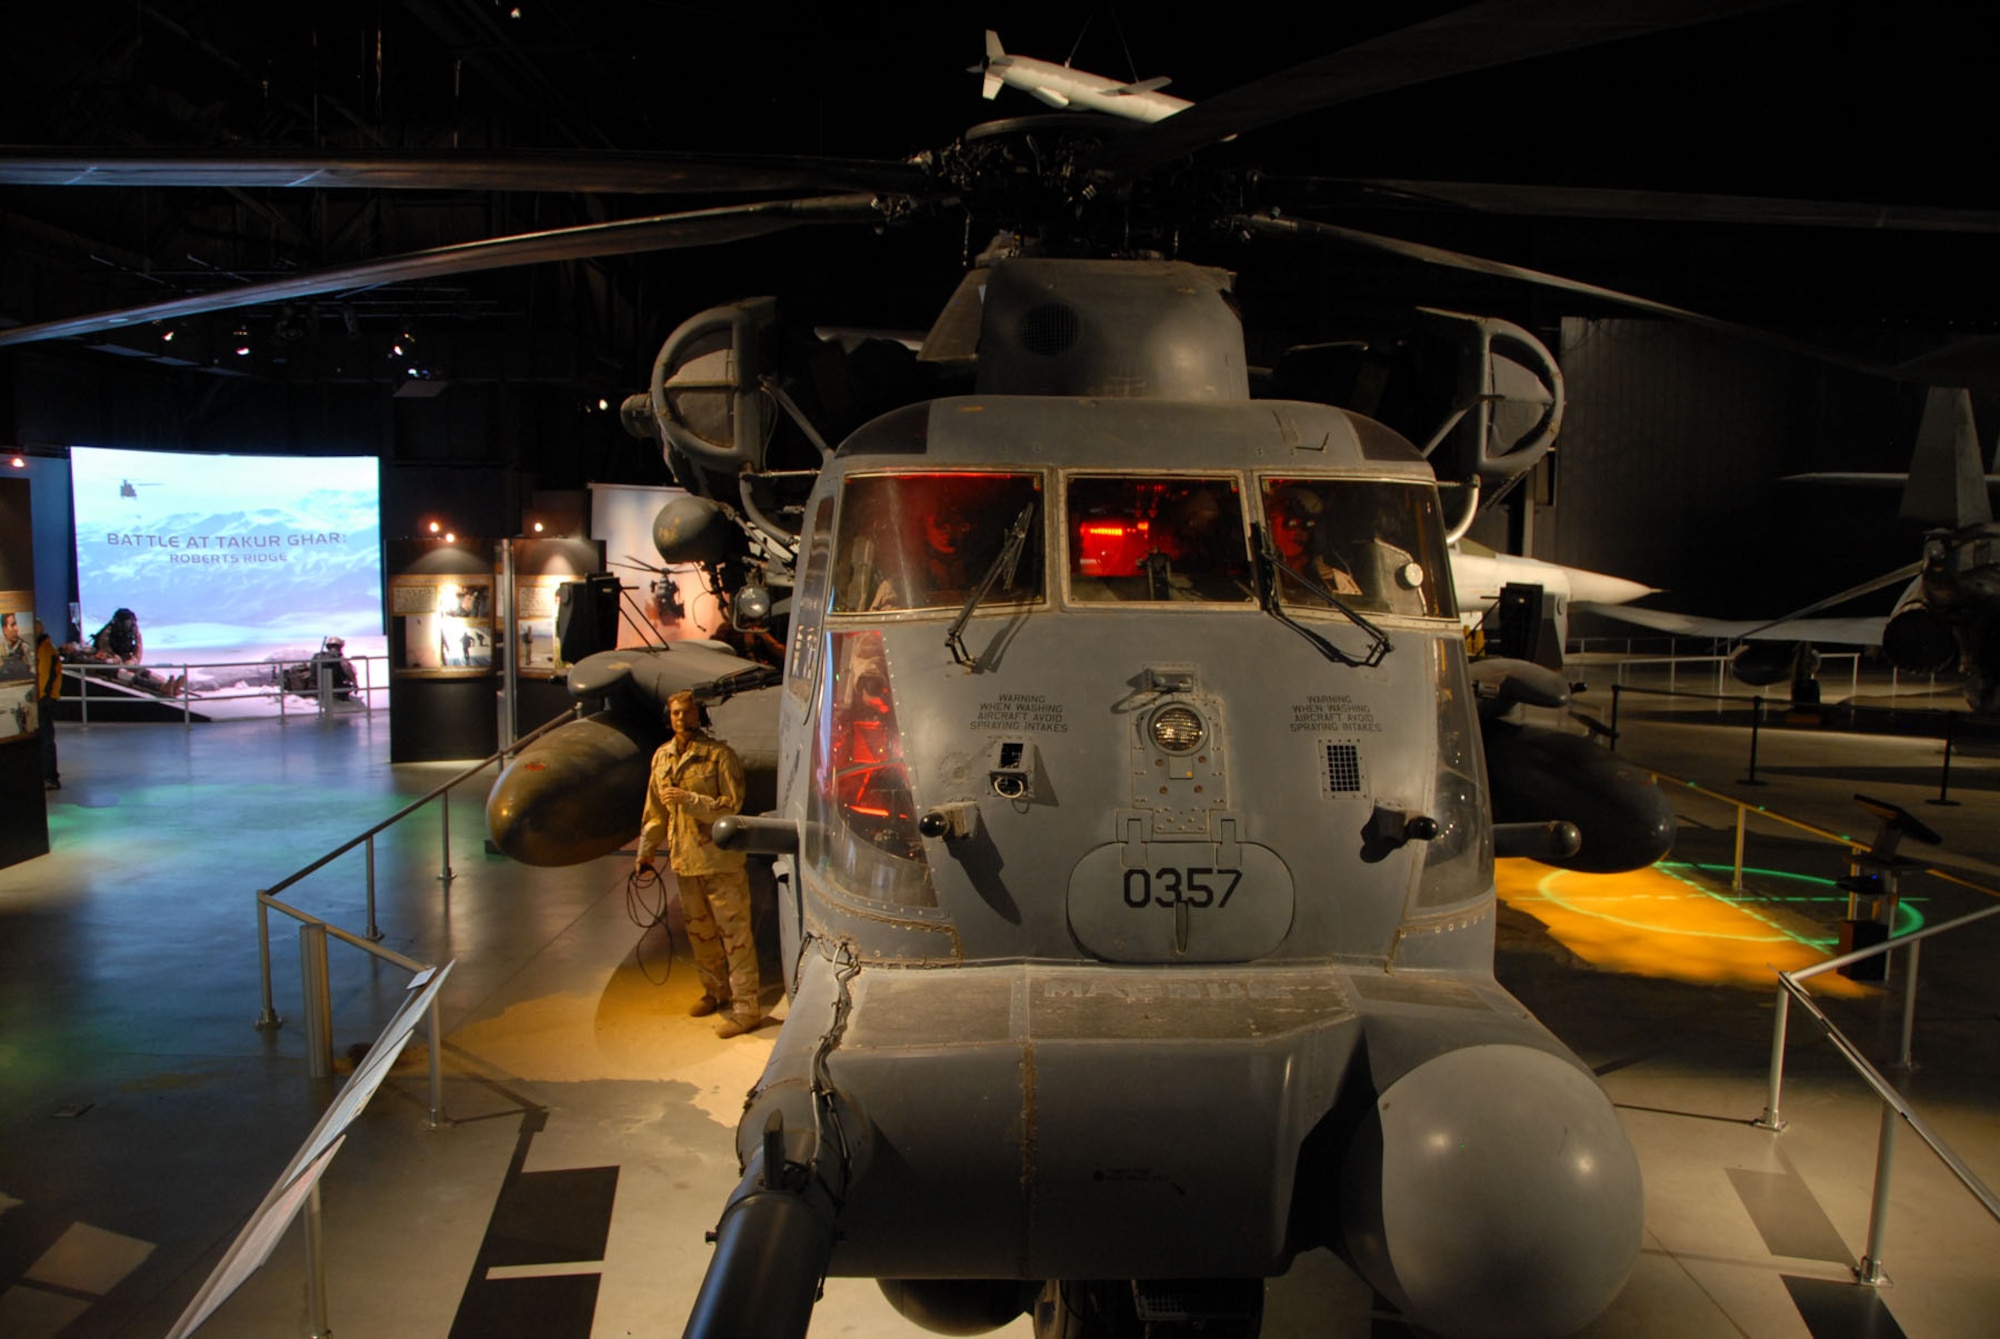 DAYTON, Ohio - The Warrior Airmen exhibit, including the MH-53, on display in the Cold War Gallery at the National Museum of the U.S. Air Force. (U.S. Air Force photo)